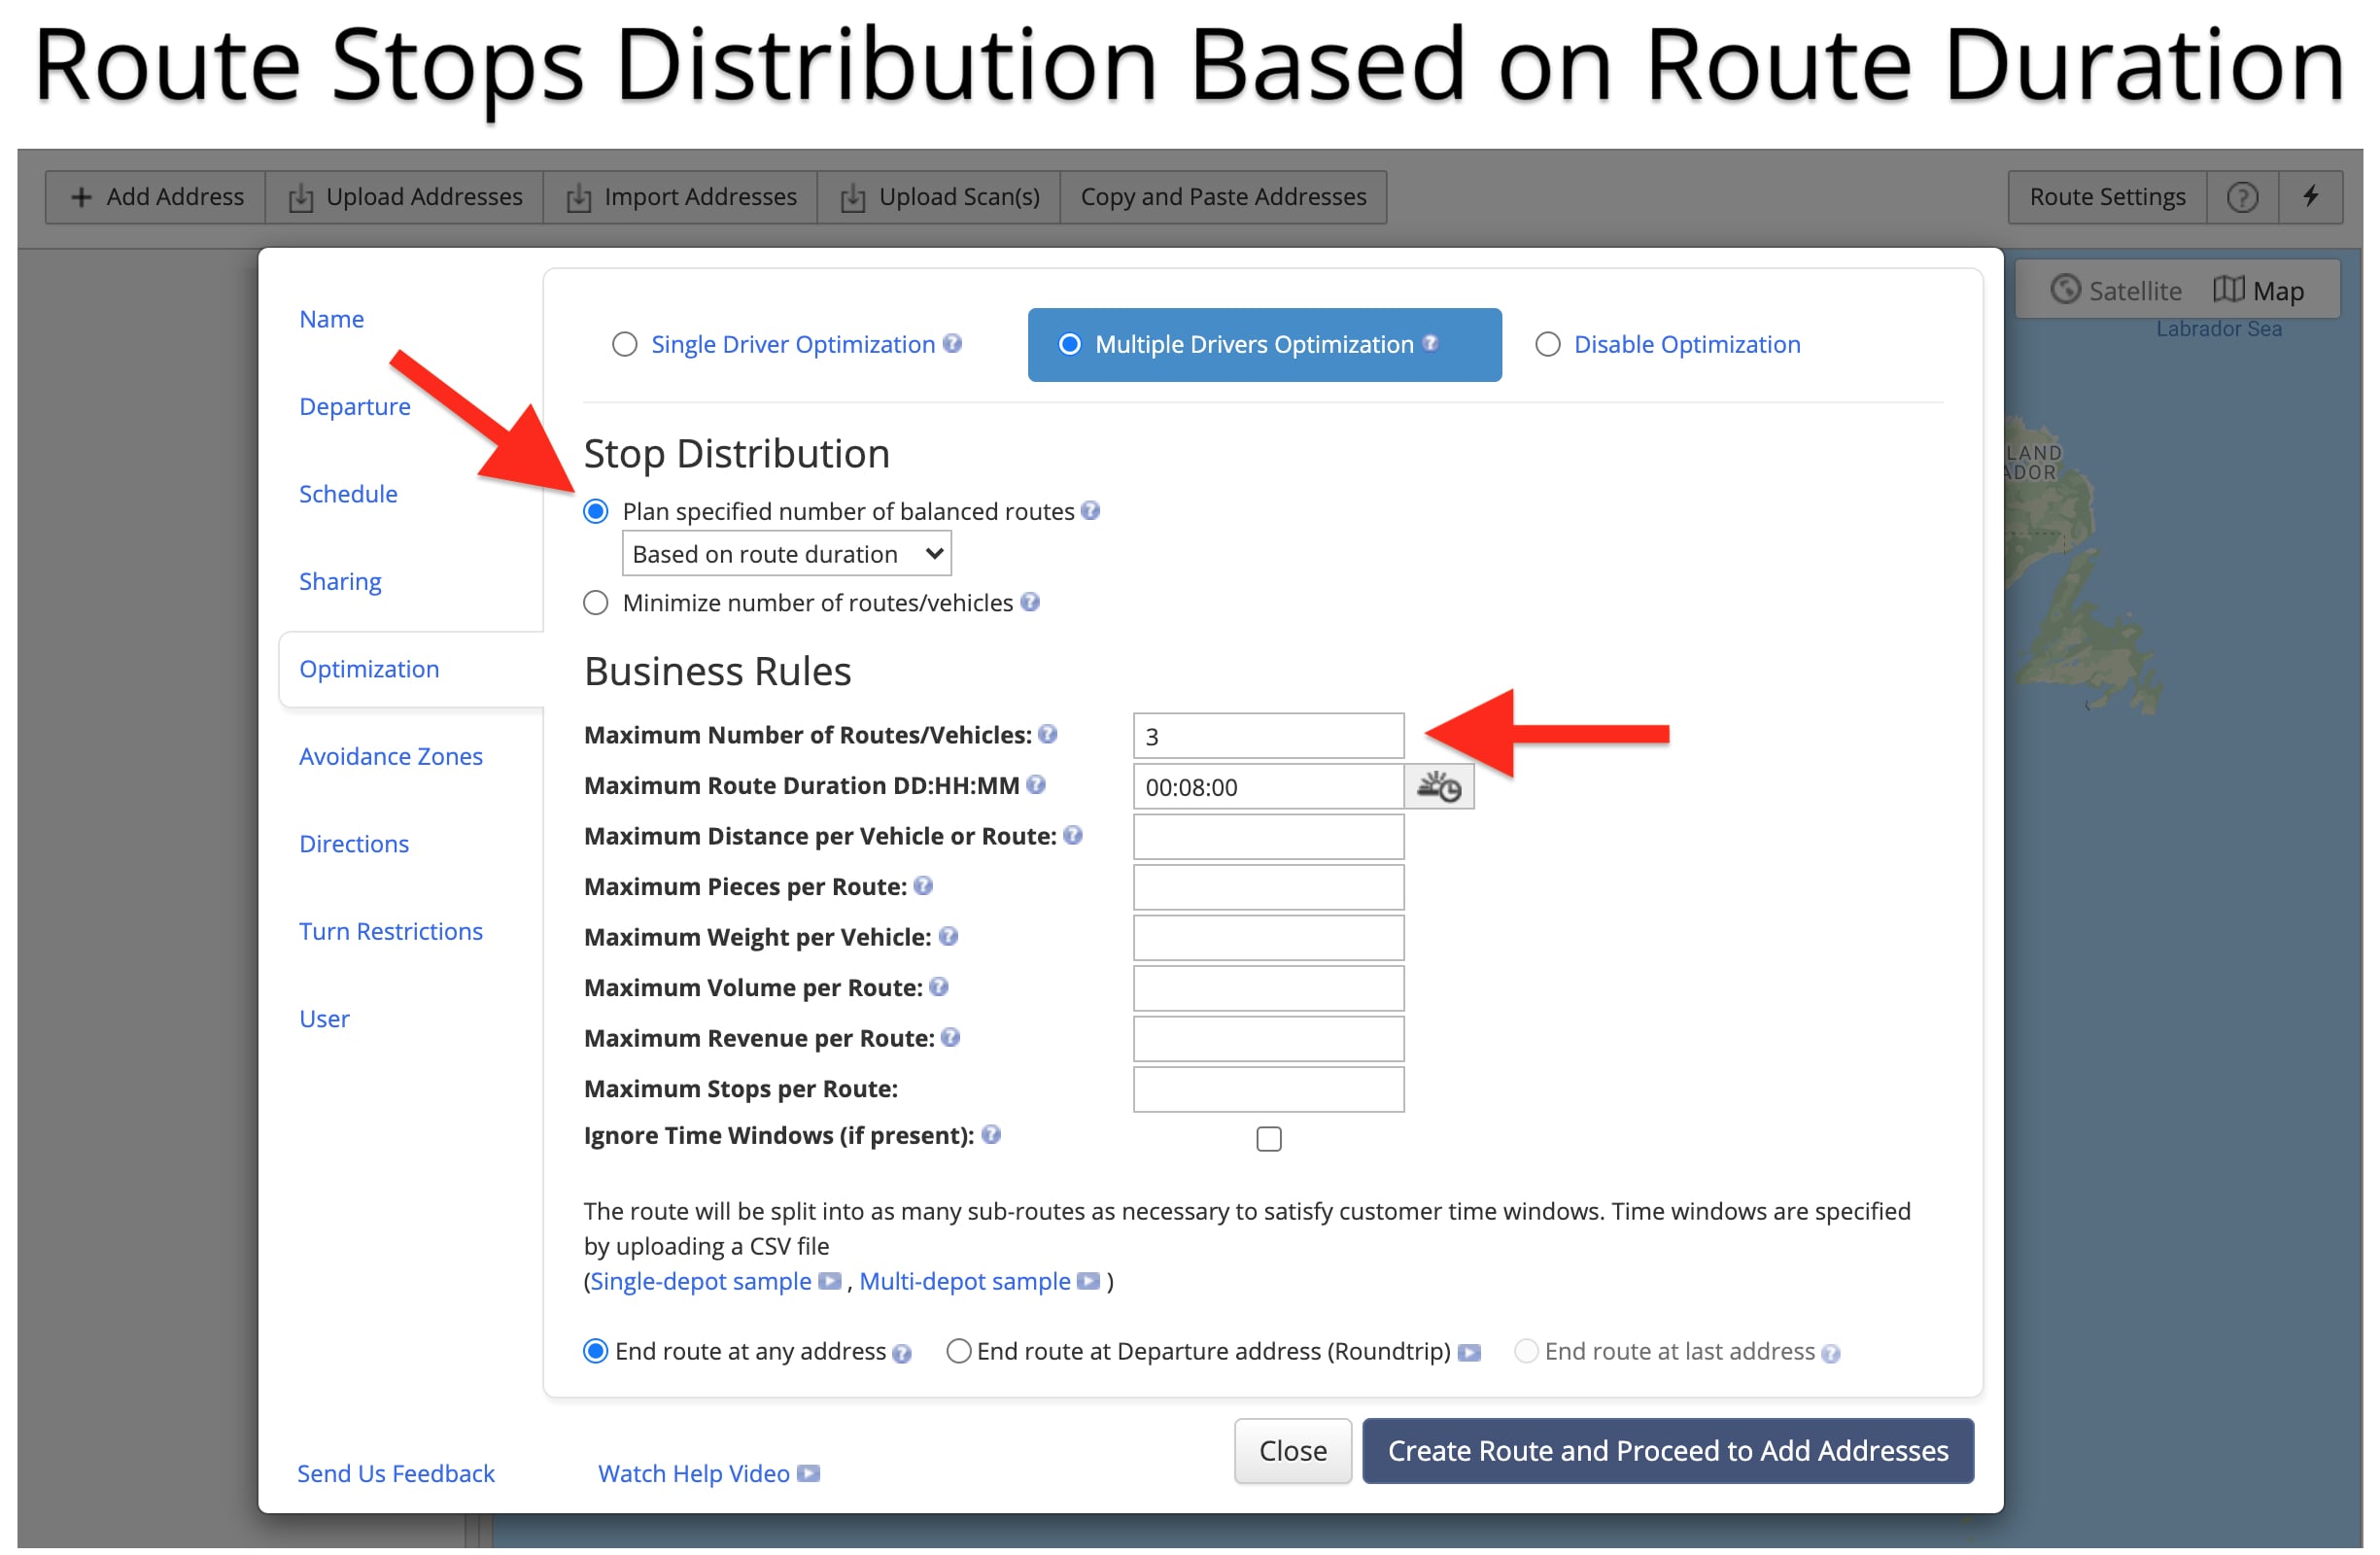 Route balancing optimization with route stops distribution based on route duration and route time.